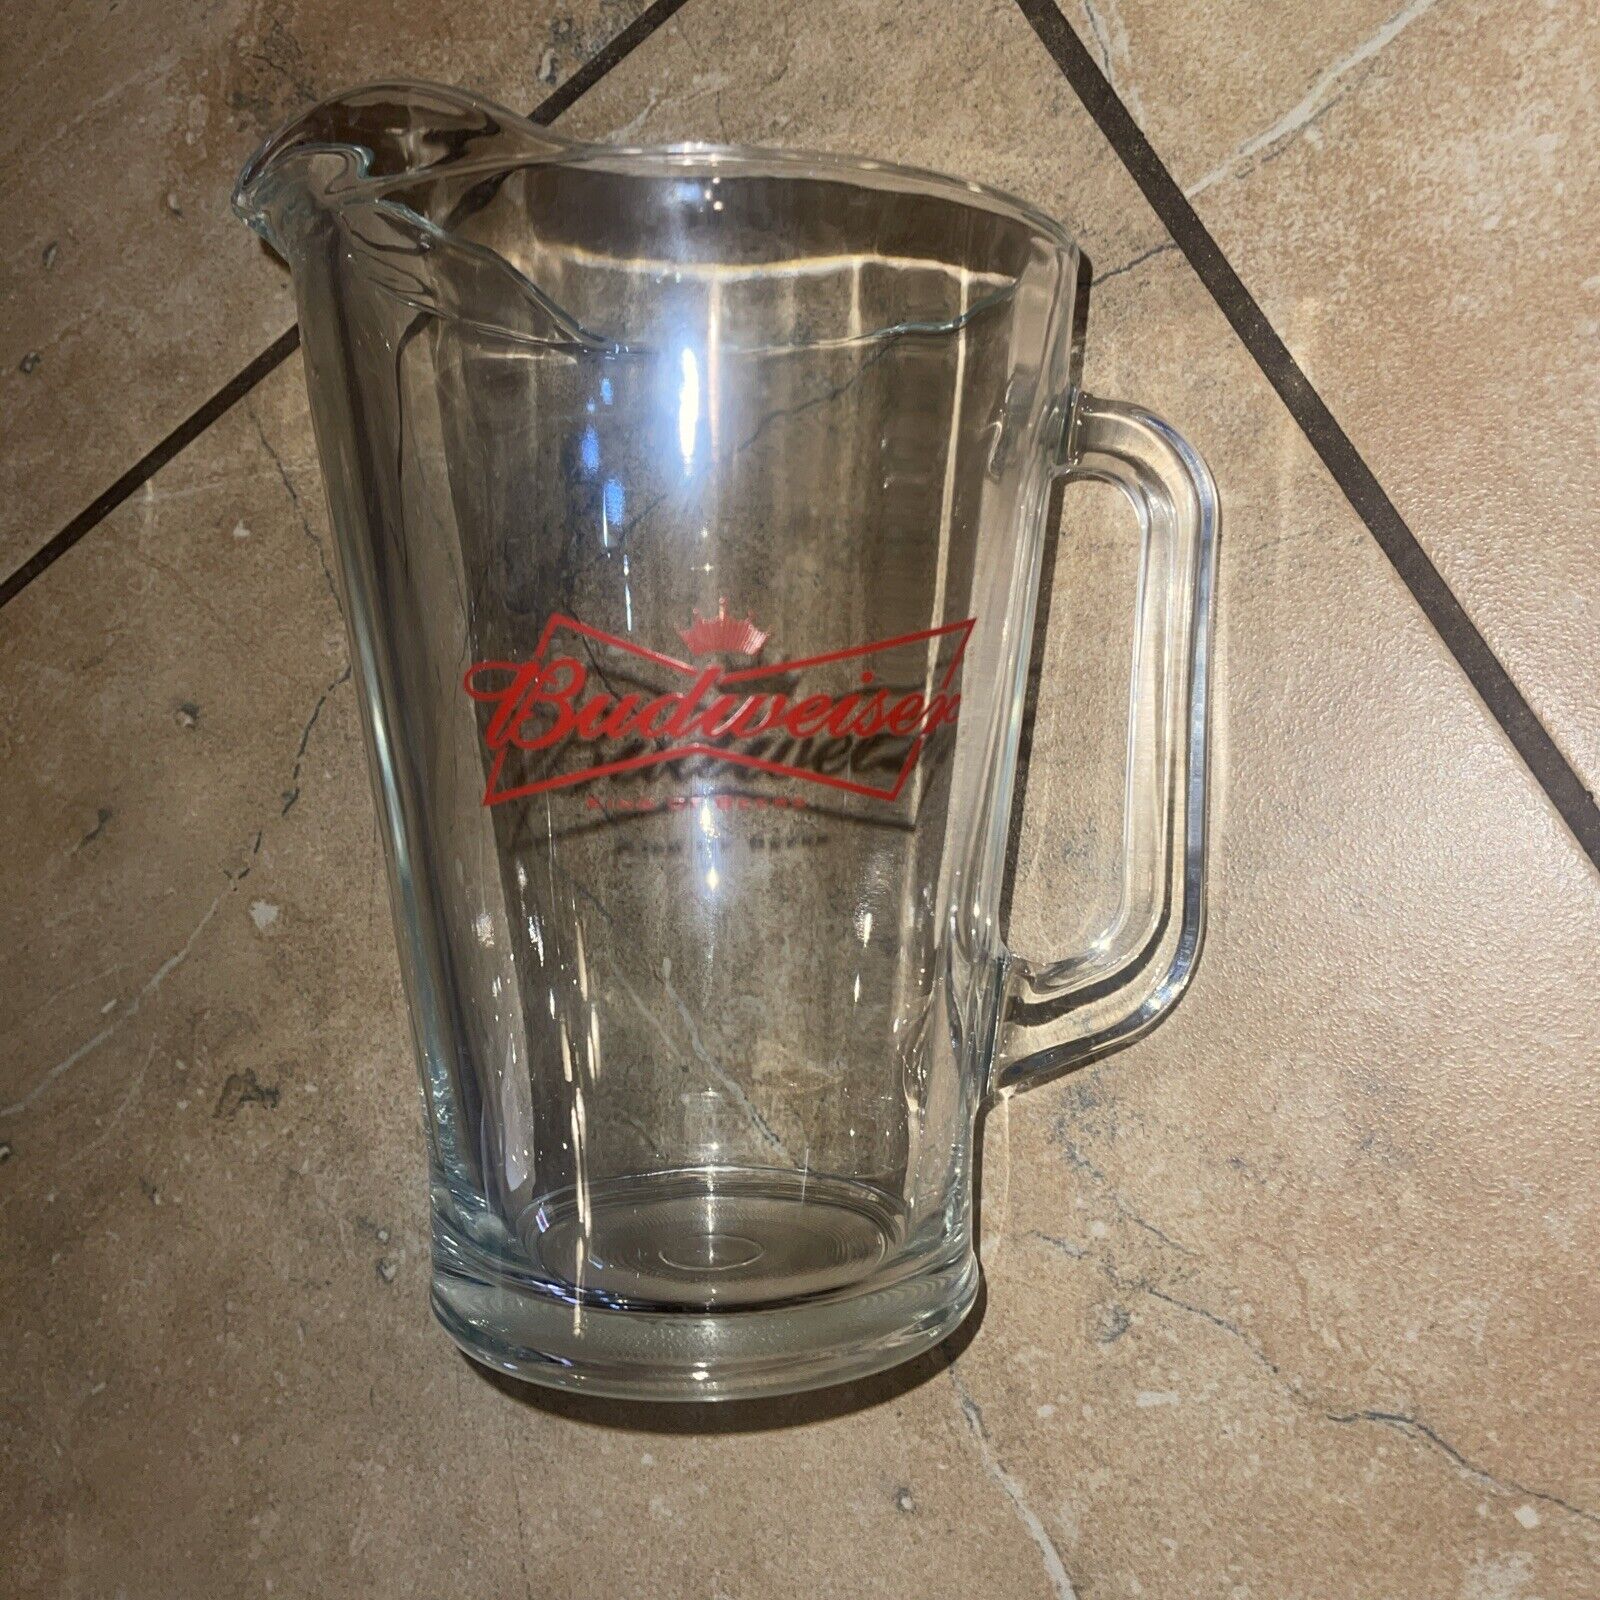 BUDWEISER King of Beers Heavy Glass Pub Beer Pitcher Ice Rim Dimpled Bottom